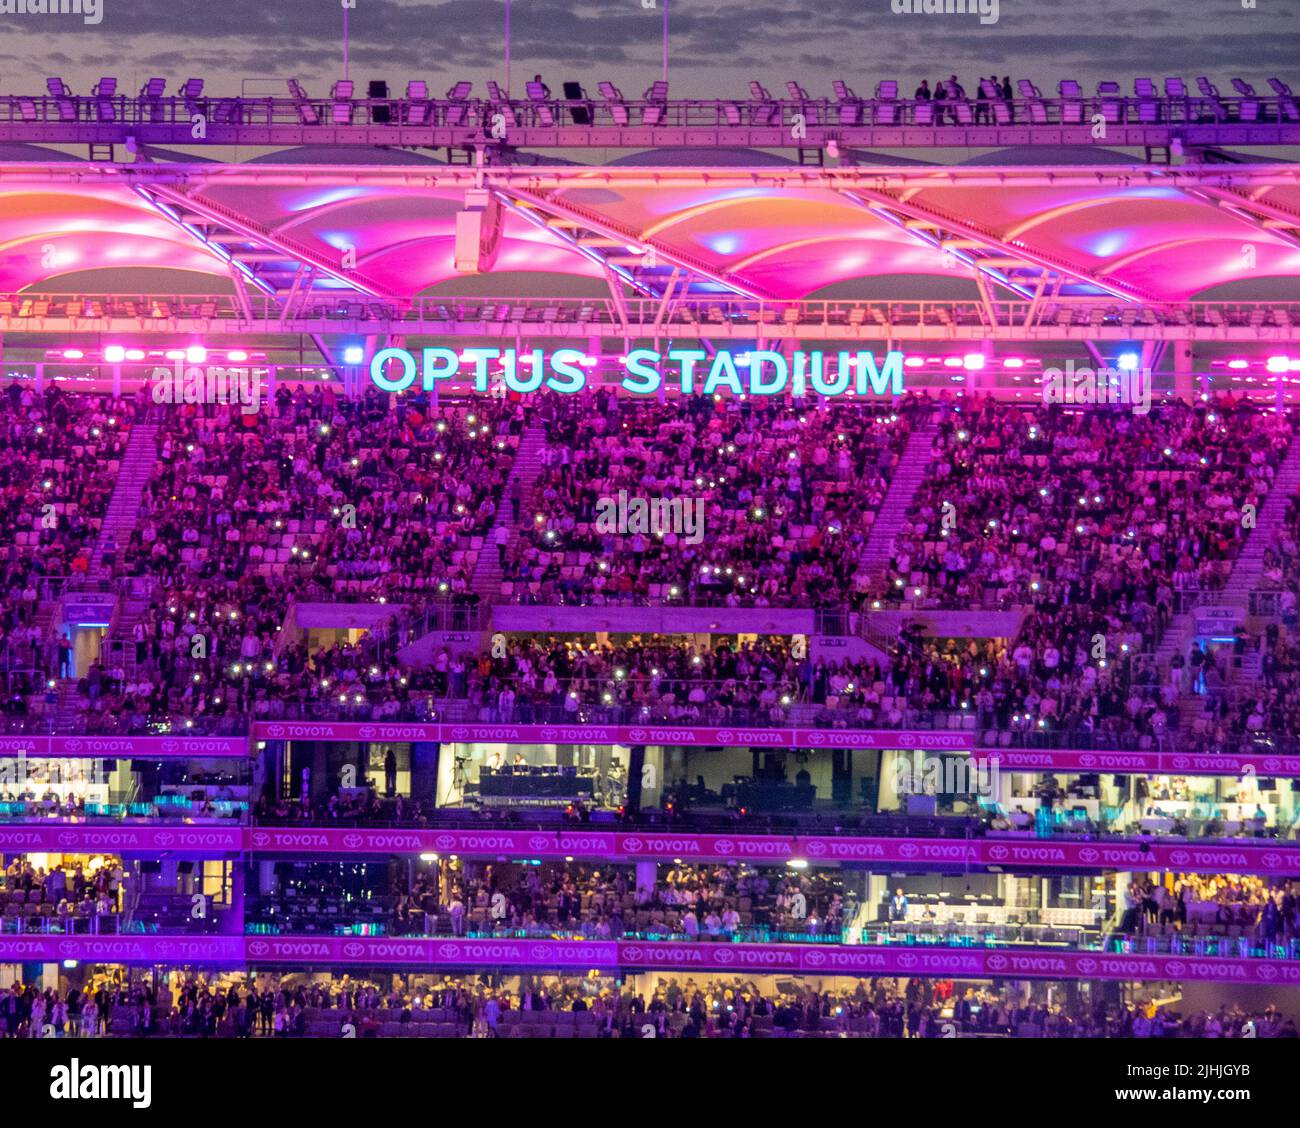 Fullhouse of fans and supporters at Optus Stadium at night lights 2021 AFL Grand Final Perth Western Australia. Stock Photo